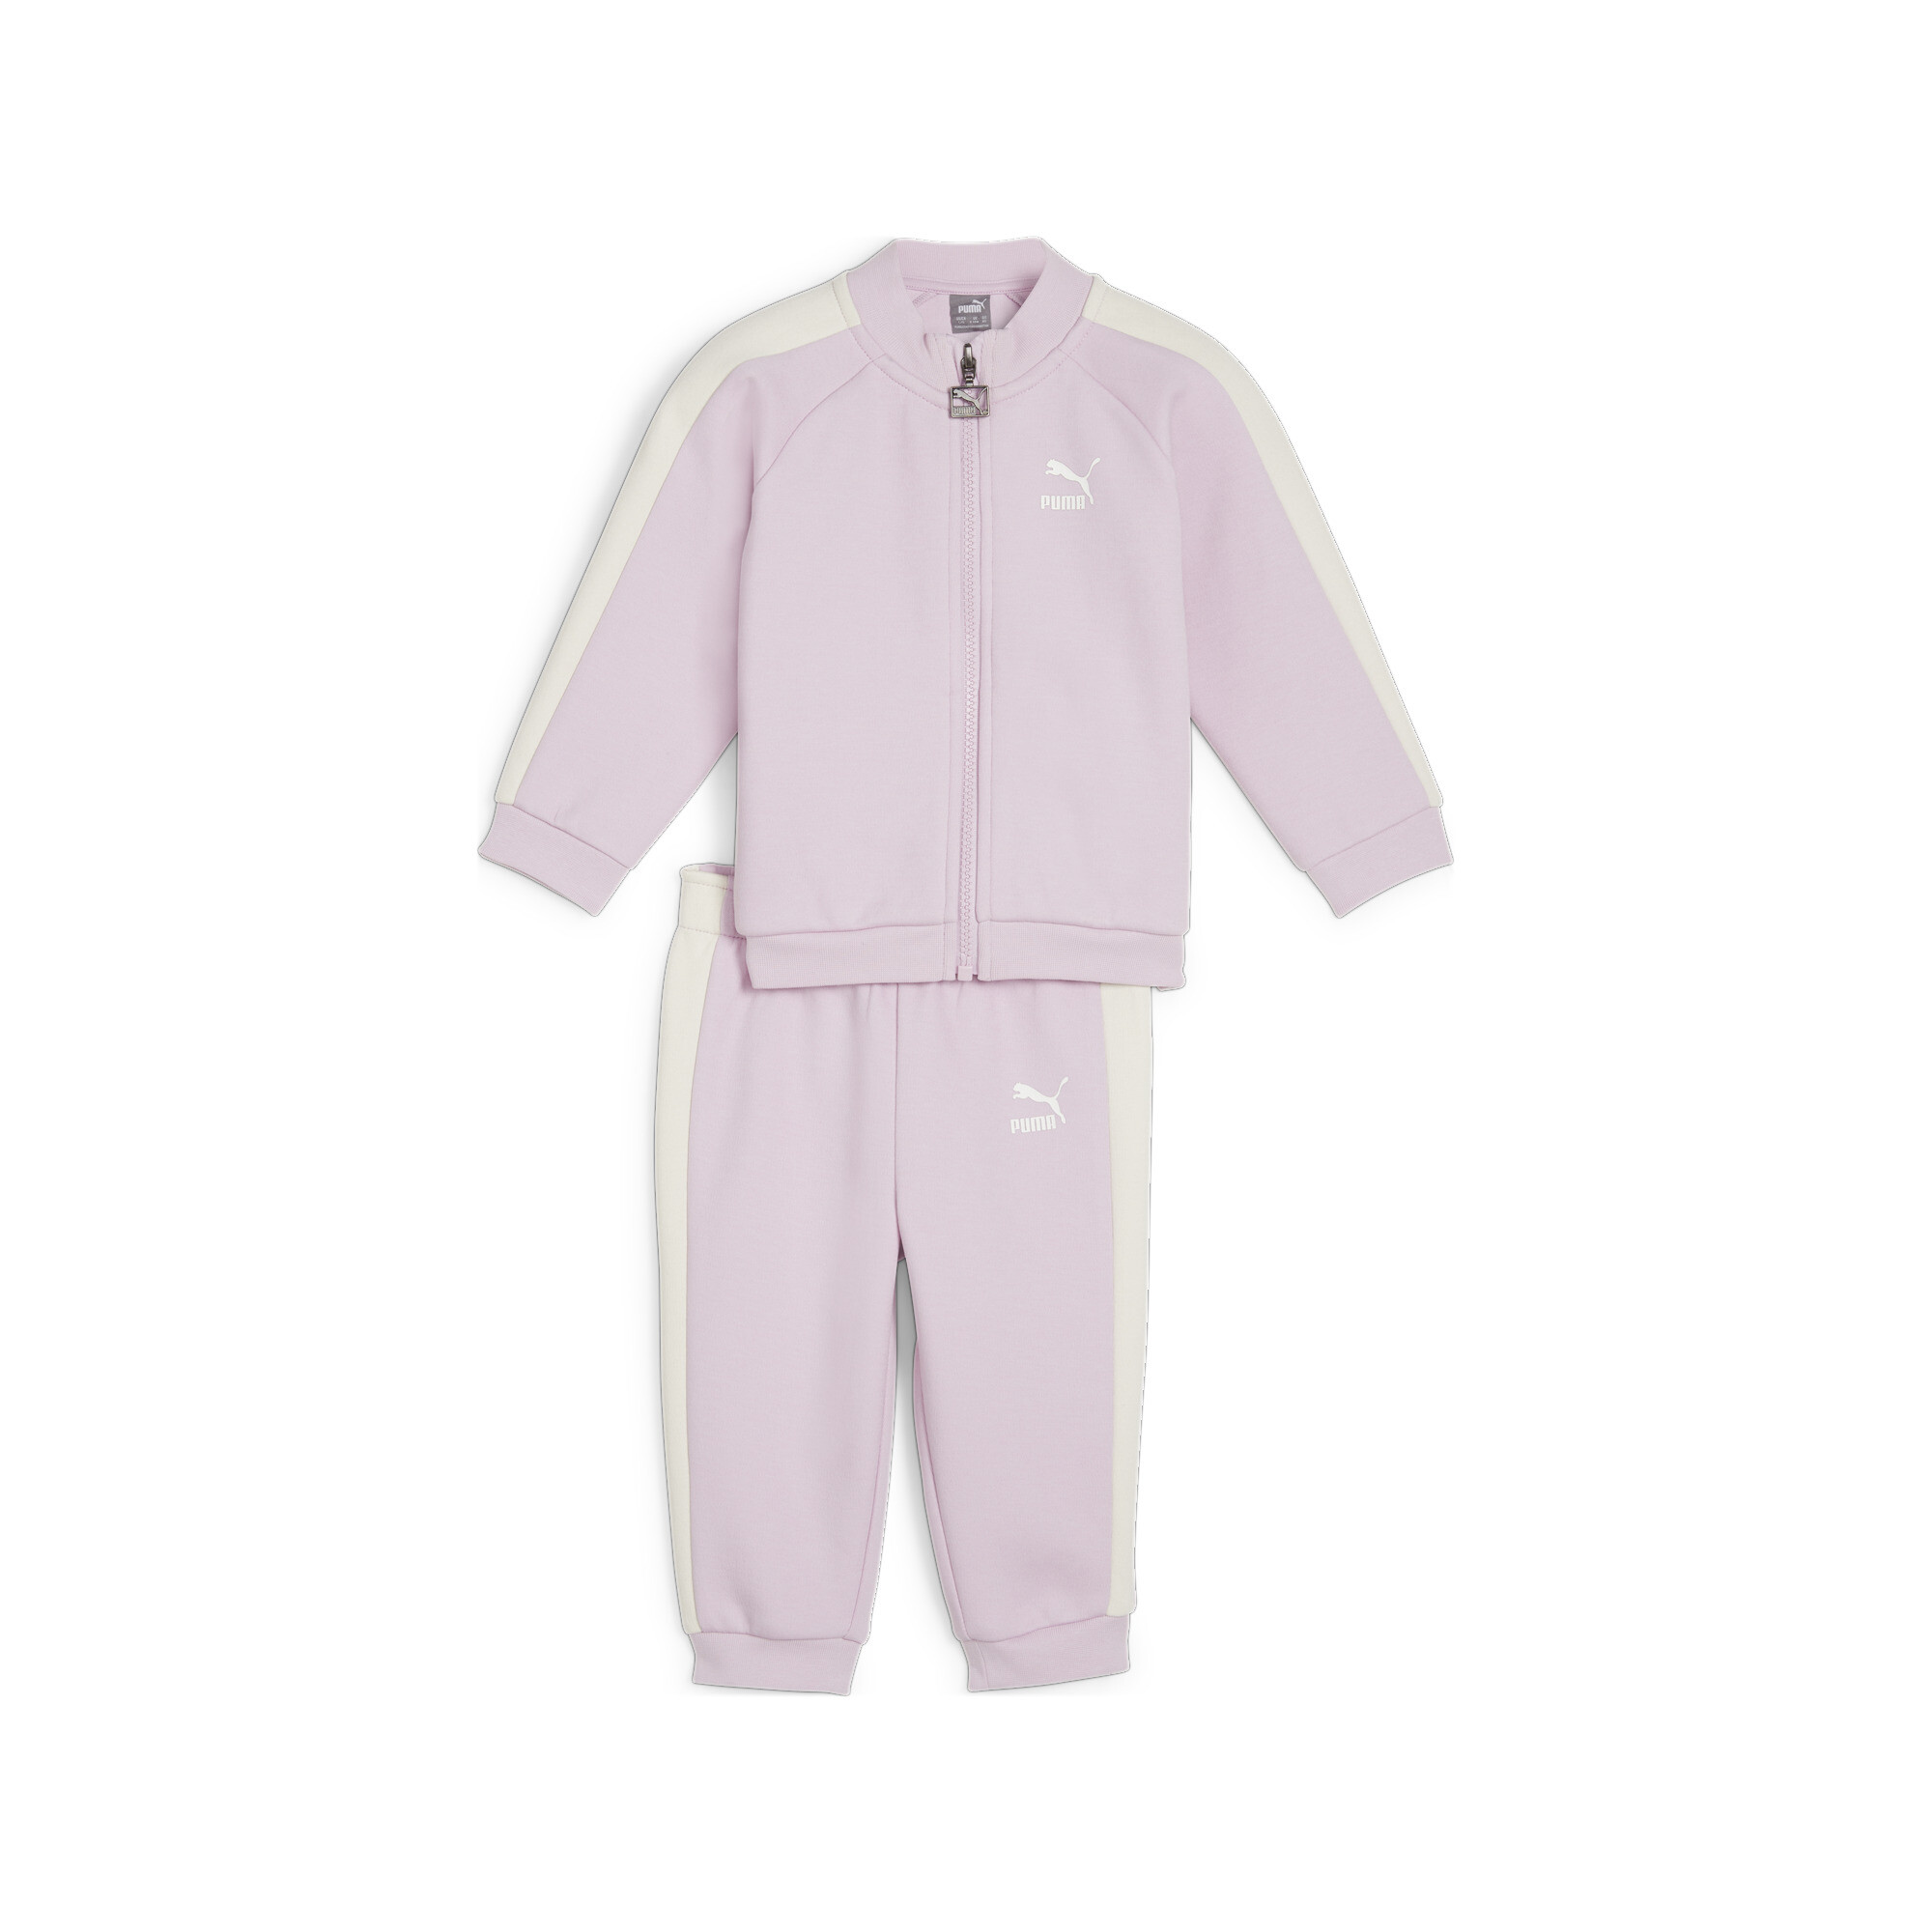 Kids' PUMA MINICATS T7 ICONIC Baby Tracksuit Set In 90 - Purple, Size 9-12 Months